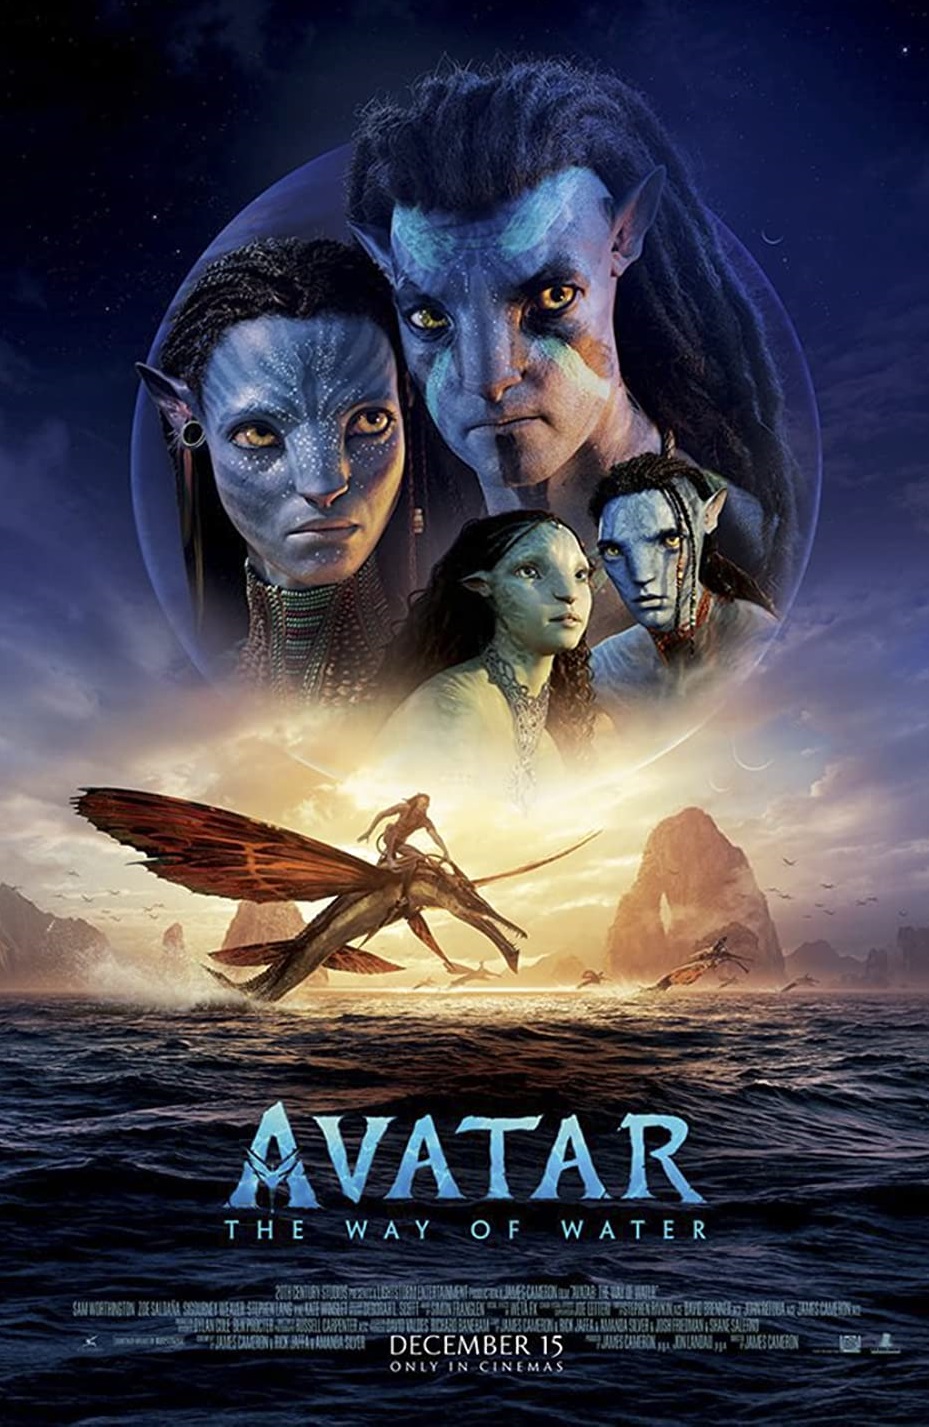 Avatar - The Way of Water 2022 Tamil Dubbed Adventure Movie Online